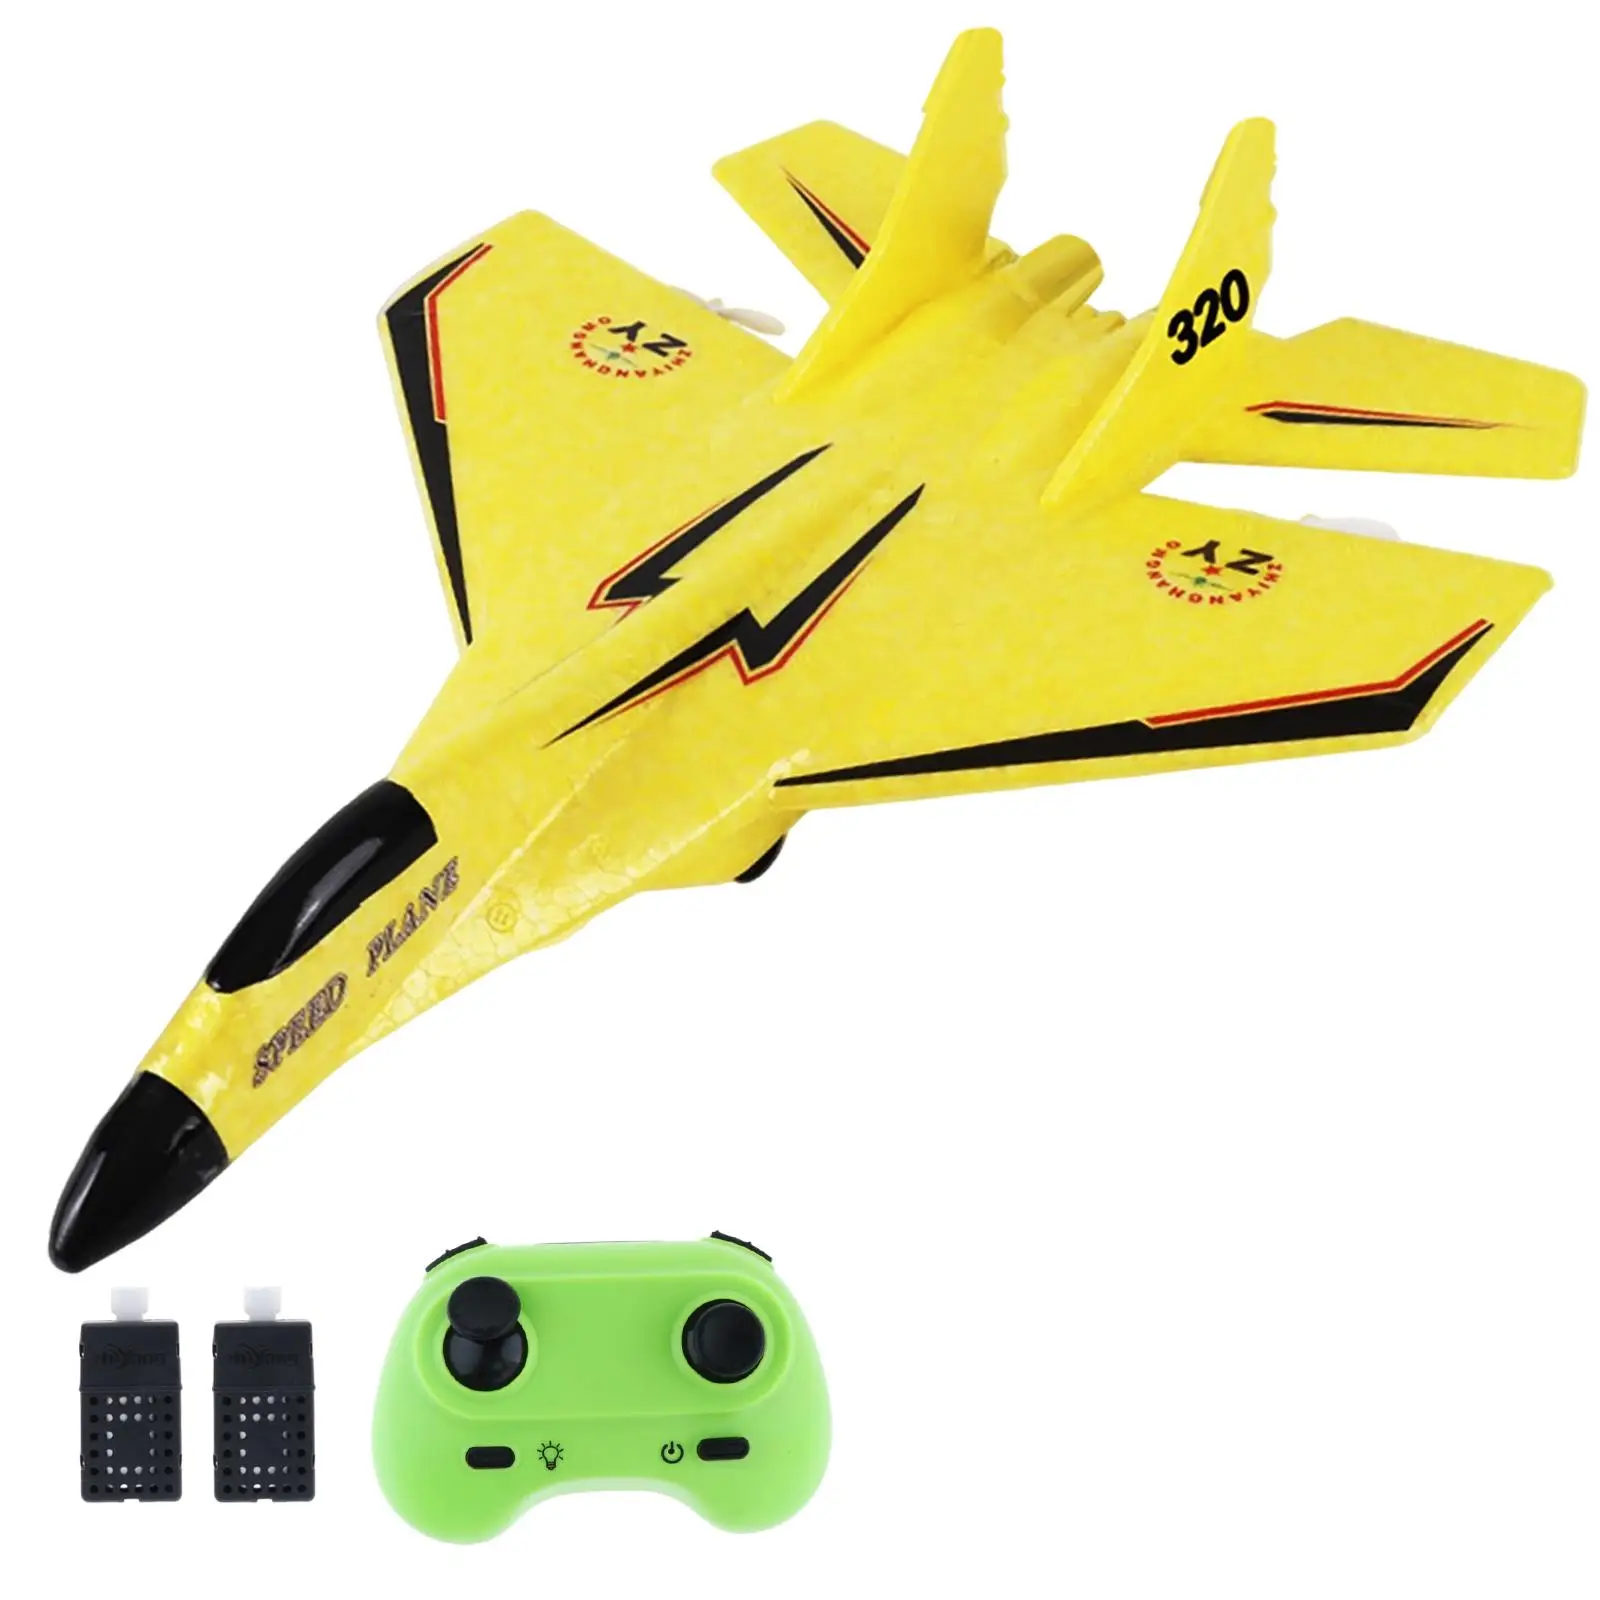 2 CH RC Plane to Fly Outdoor Flighting Toys Ready to Fly Glider Foam RC Airplane for Beginner Adults Kids Boys Girls